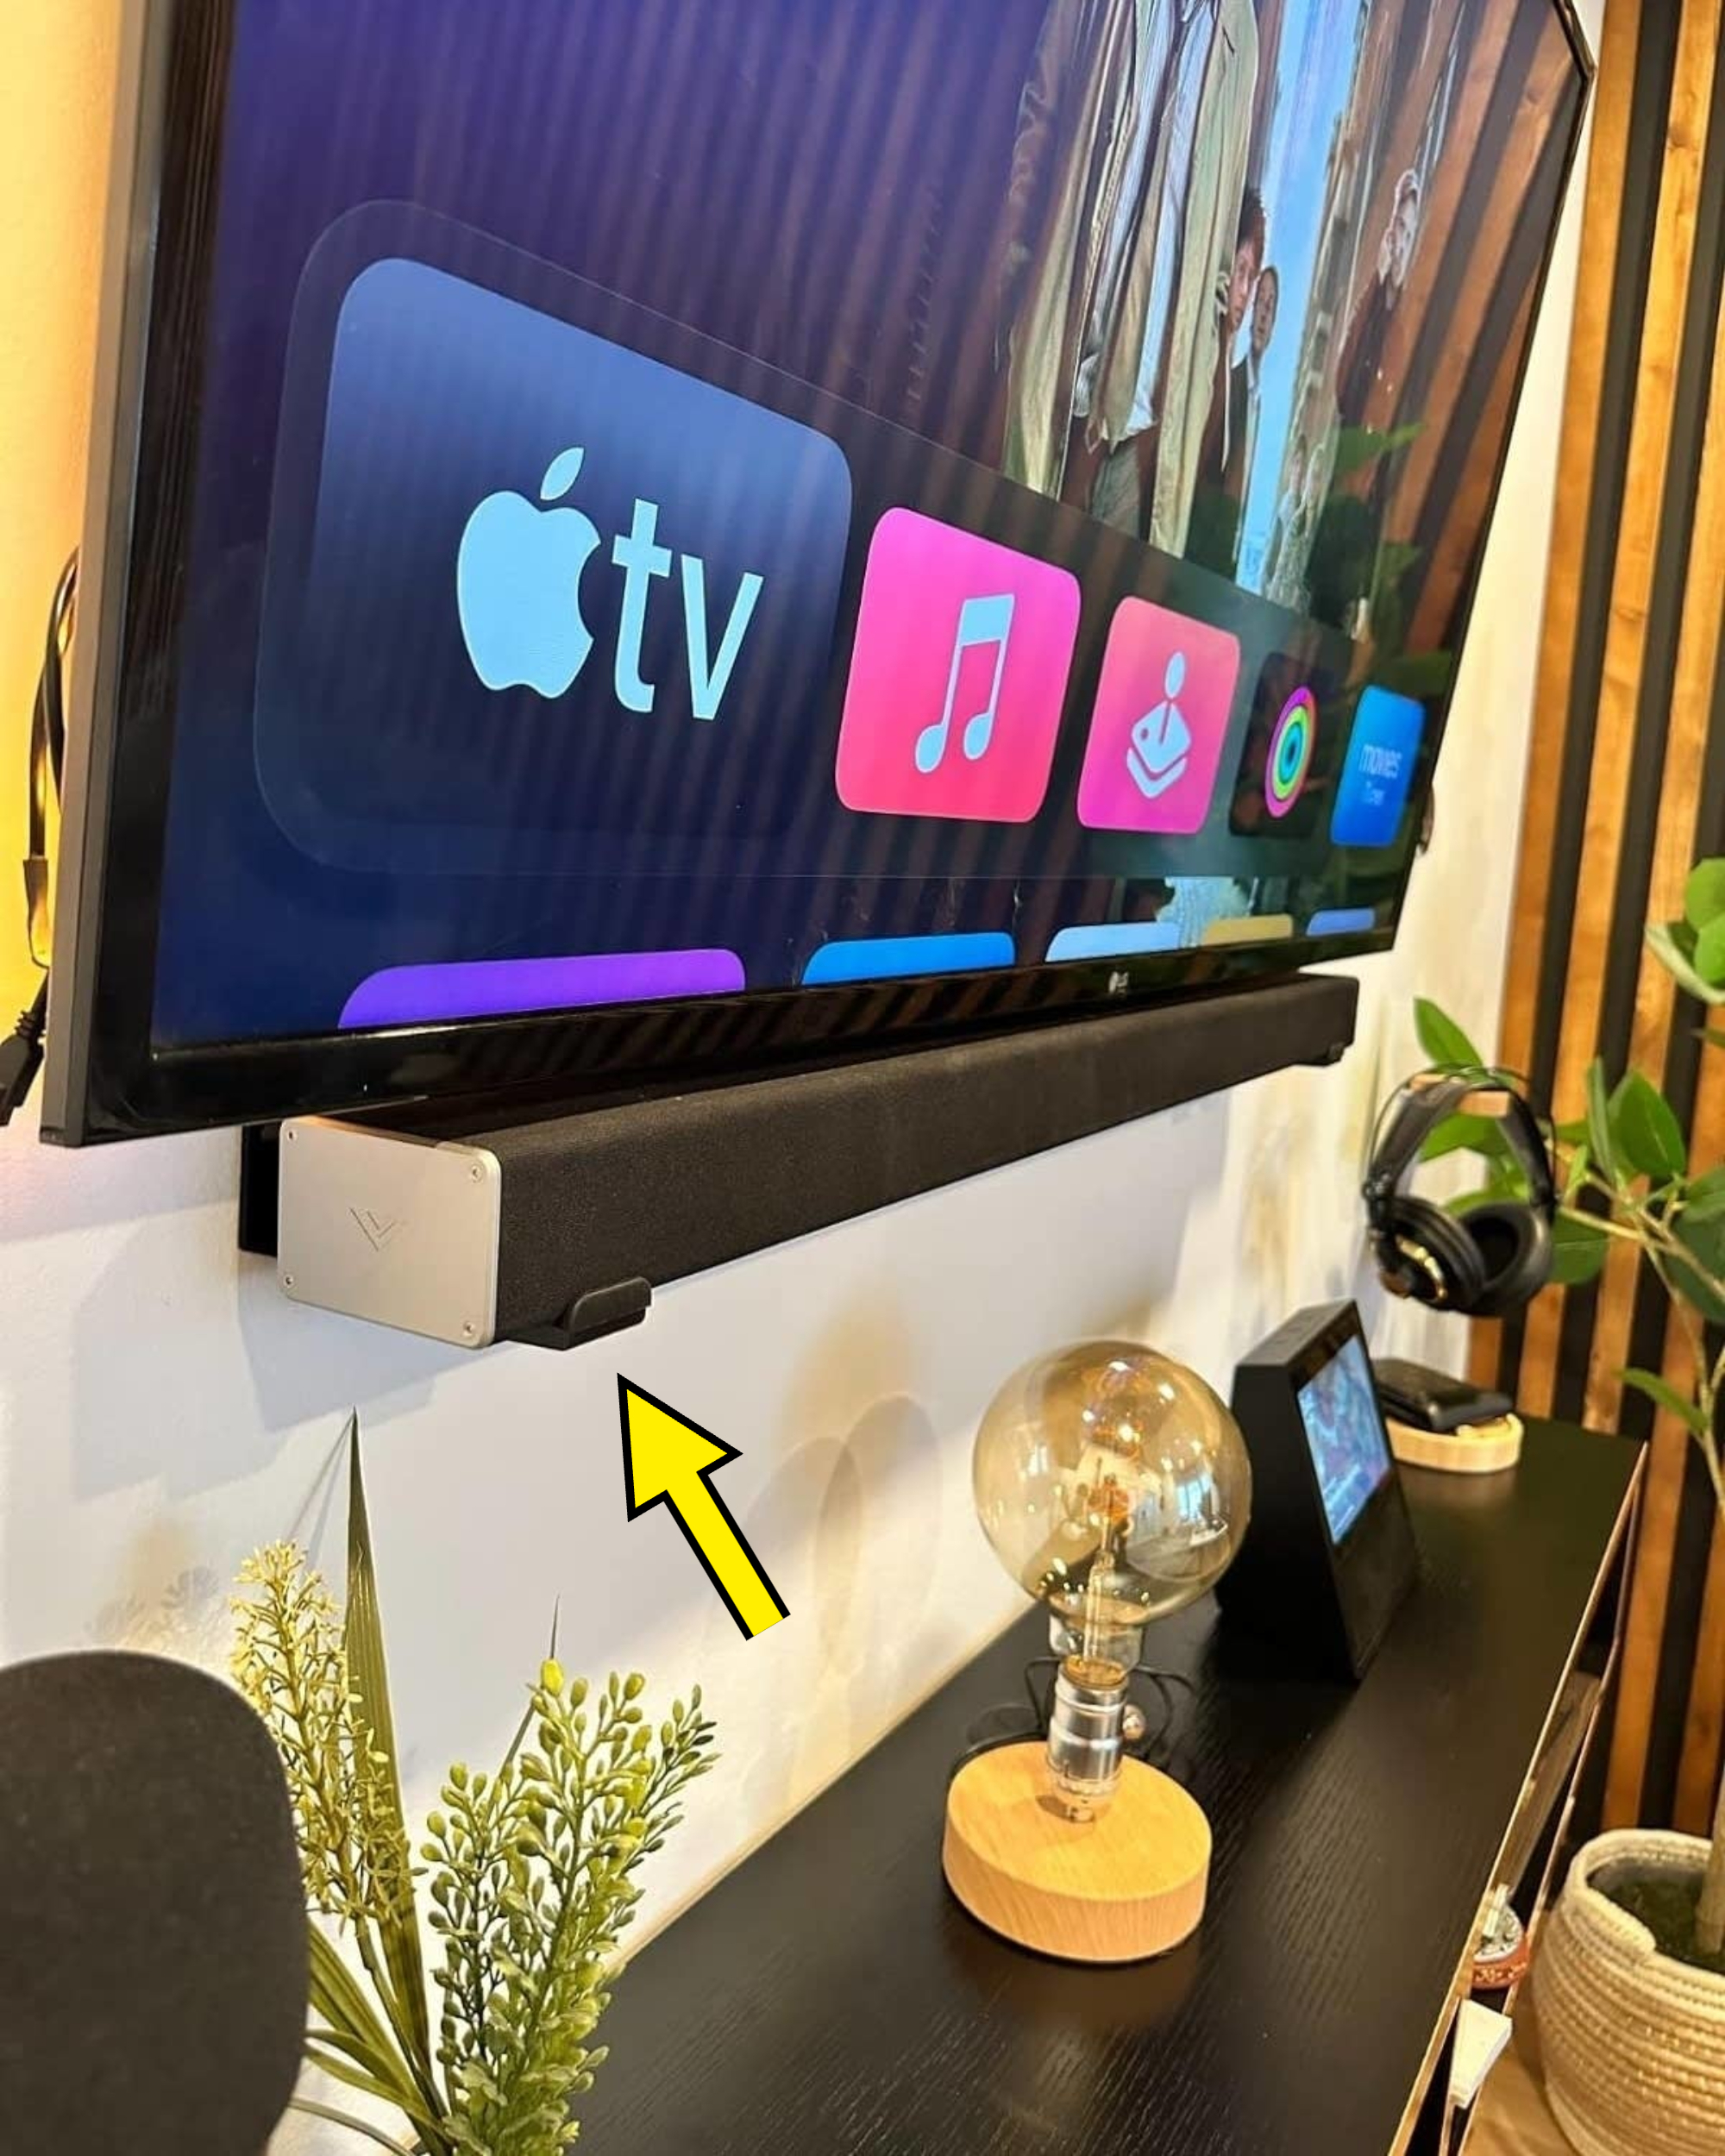 TV mounted on wall displaying Apple TV interface, with soundbar and decorative items on the shelf below